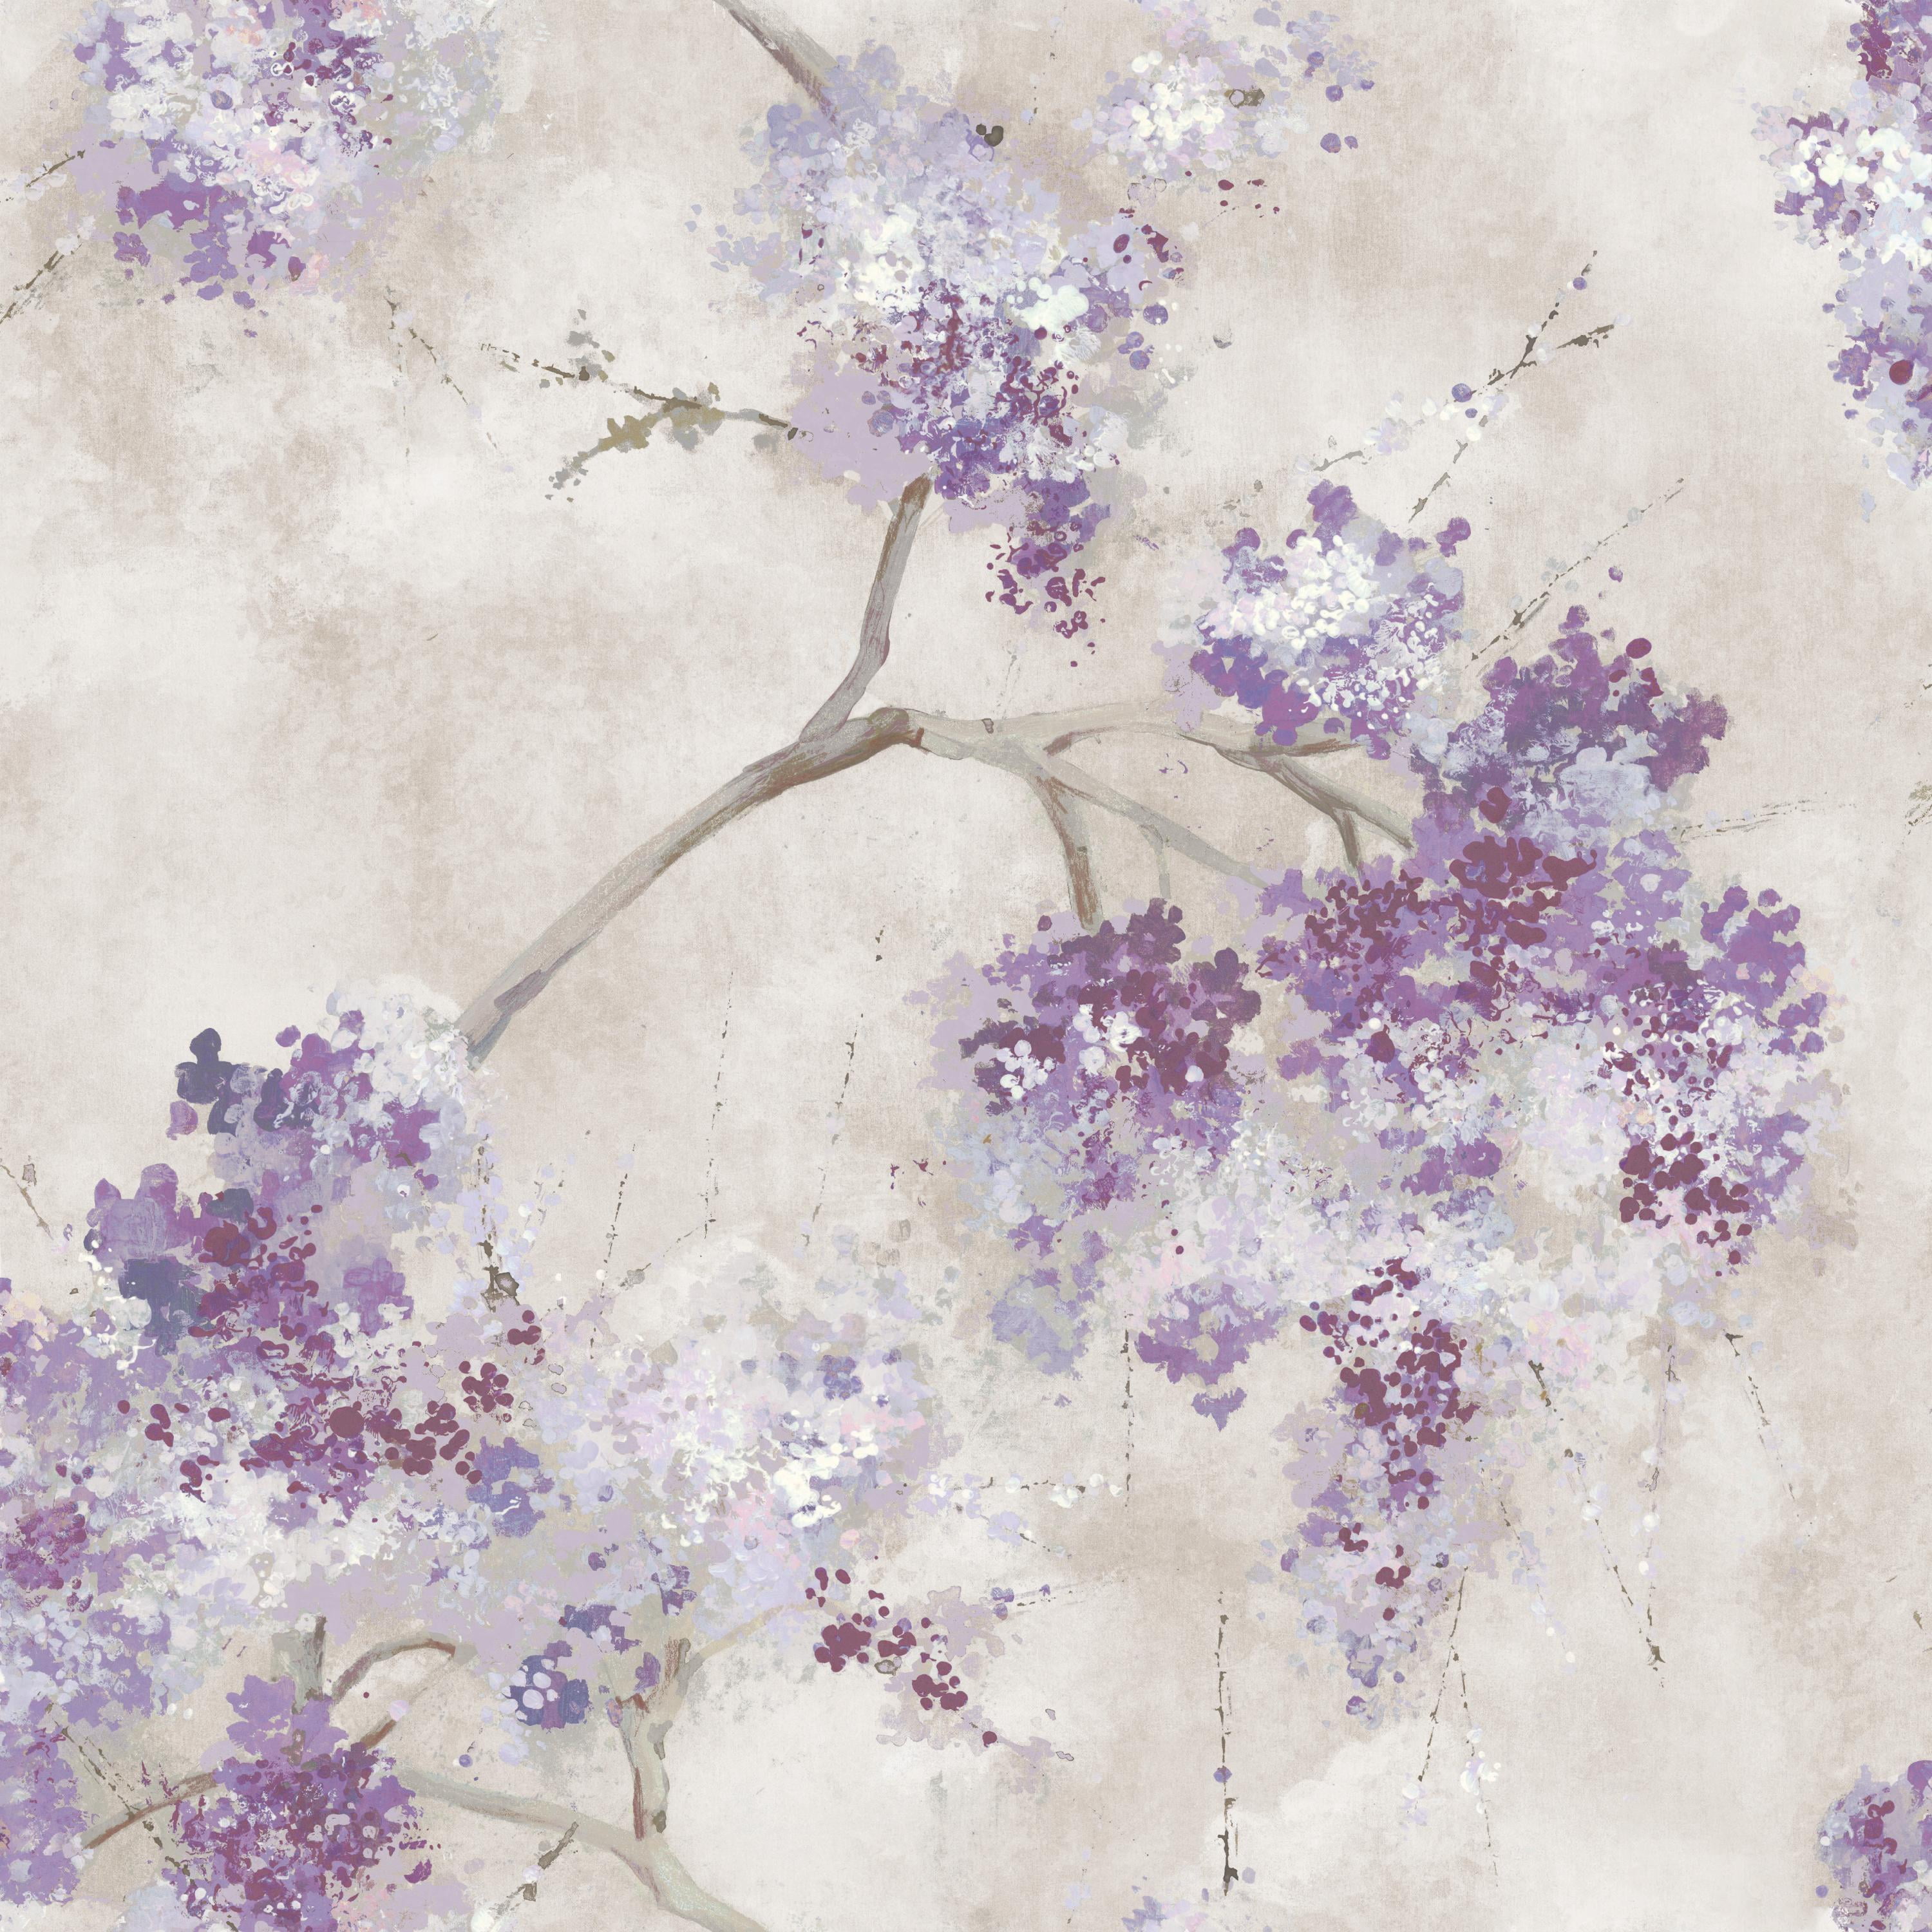 RoomMates Purple Weeping Cherry Tree Blossom Peel and Stick Wallpaper